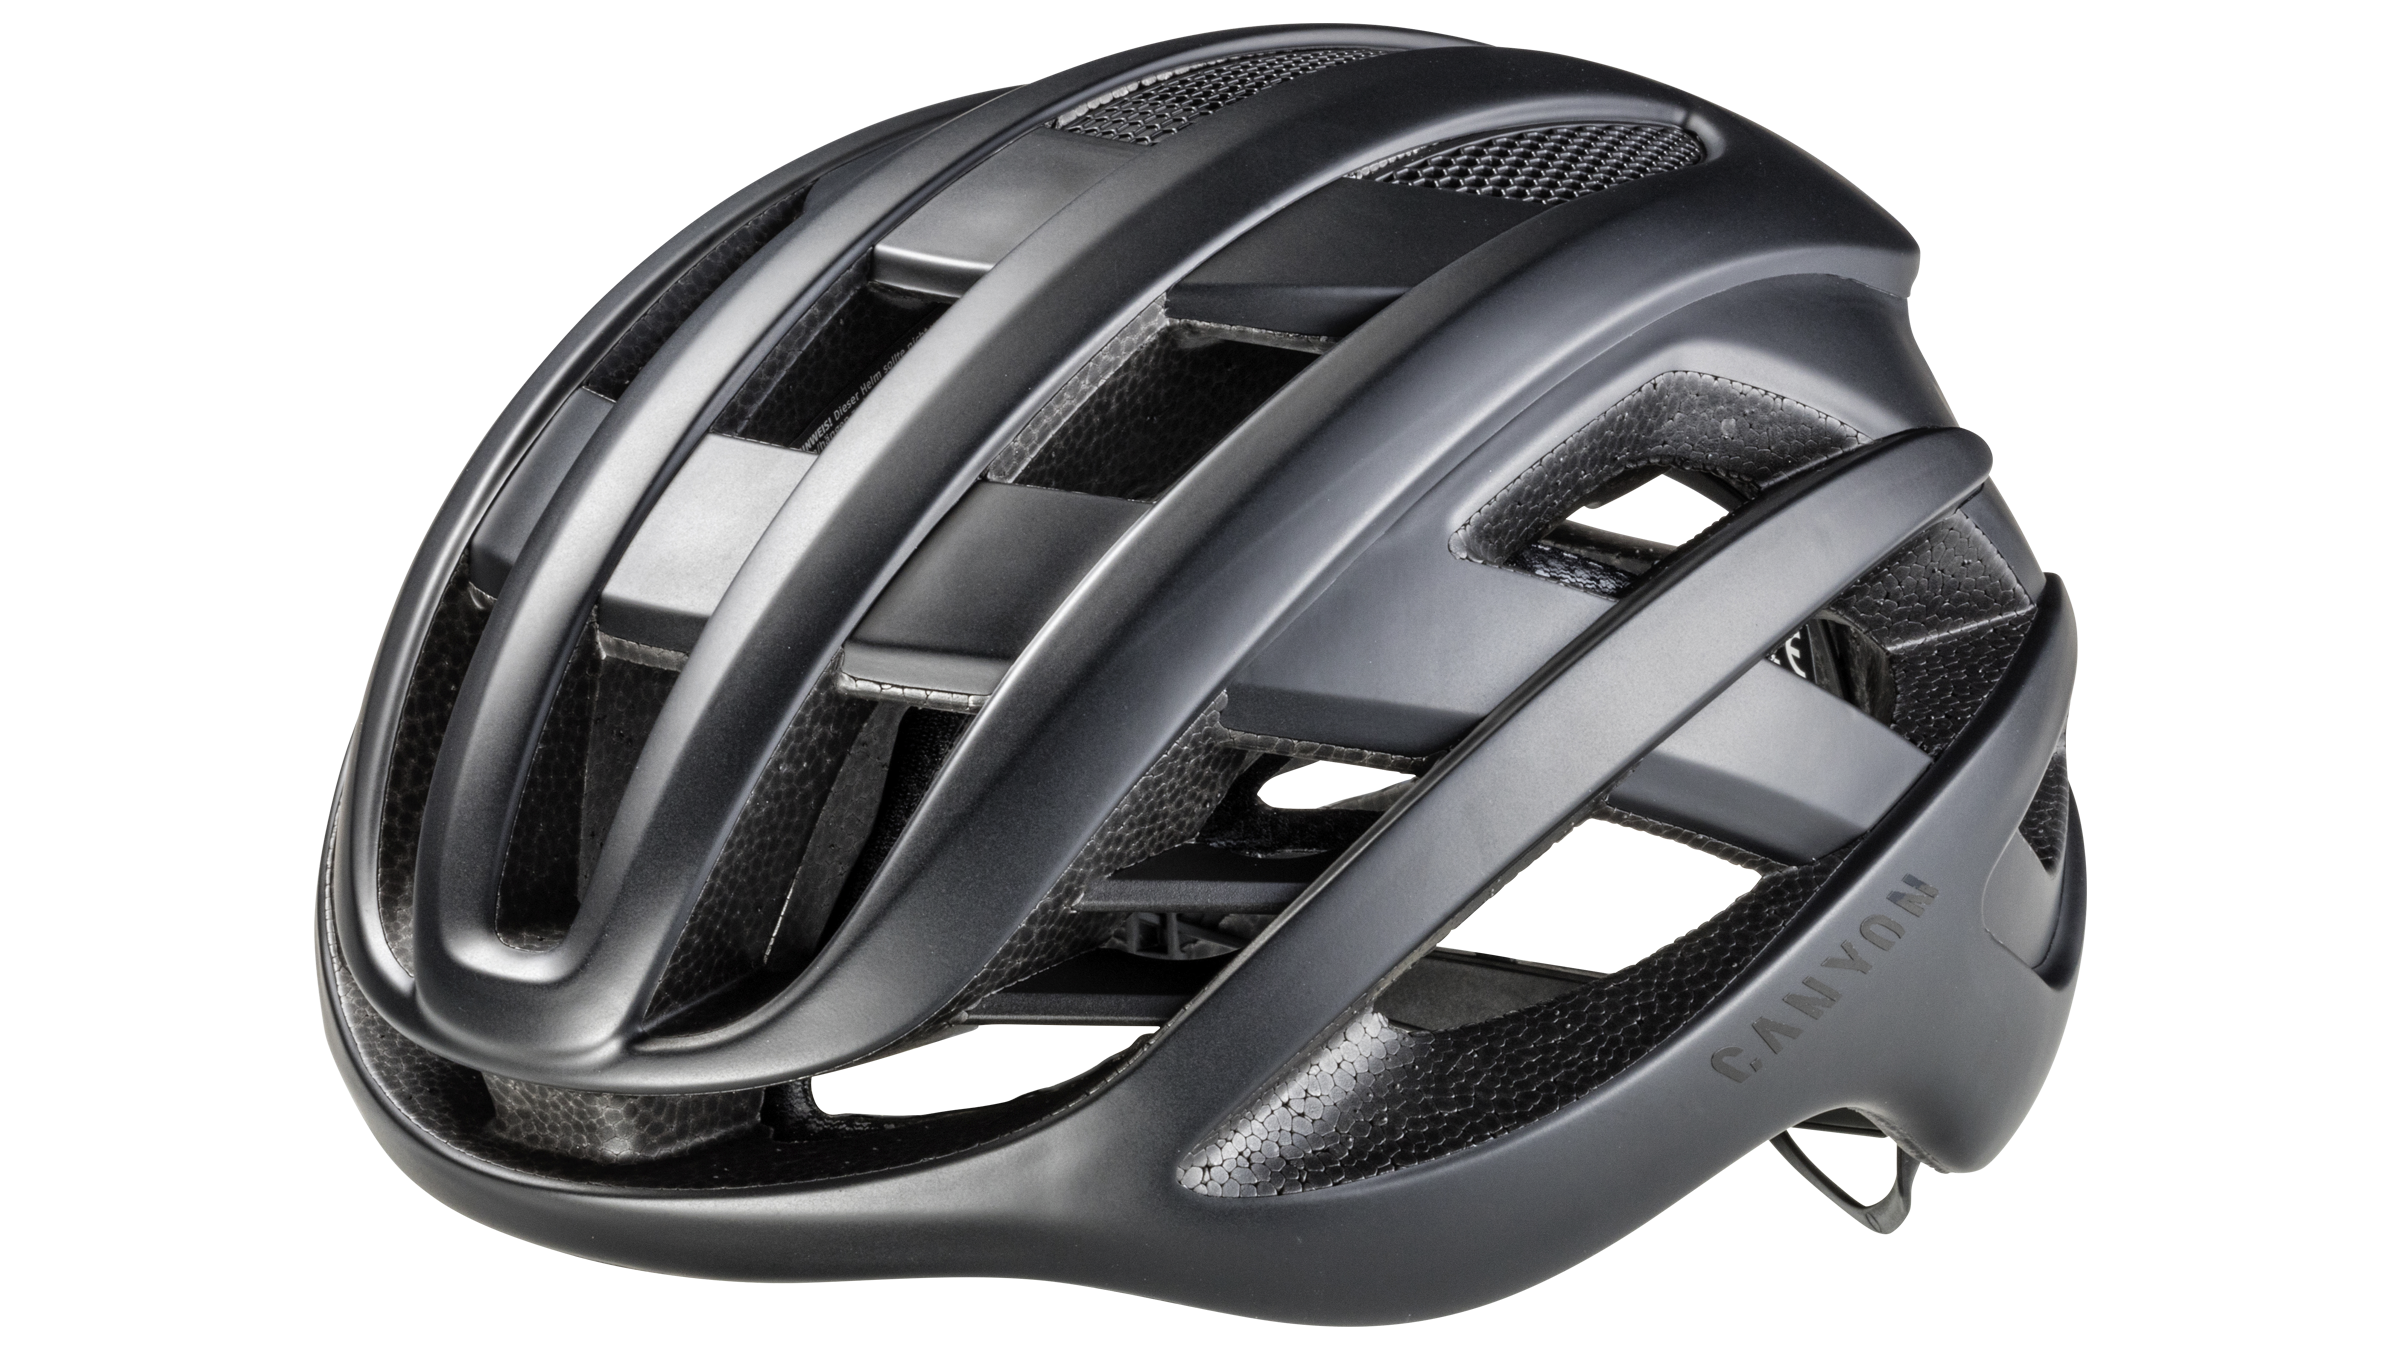 Airbreaker Helmet Silver White Size S (51-55cm) Abus Helmets and acce